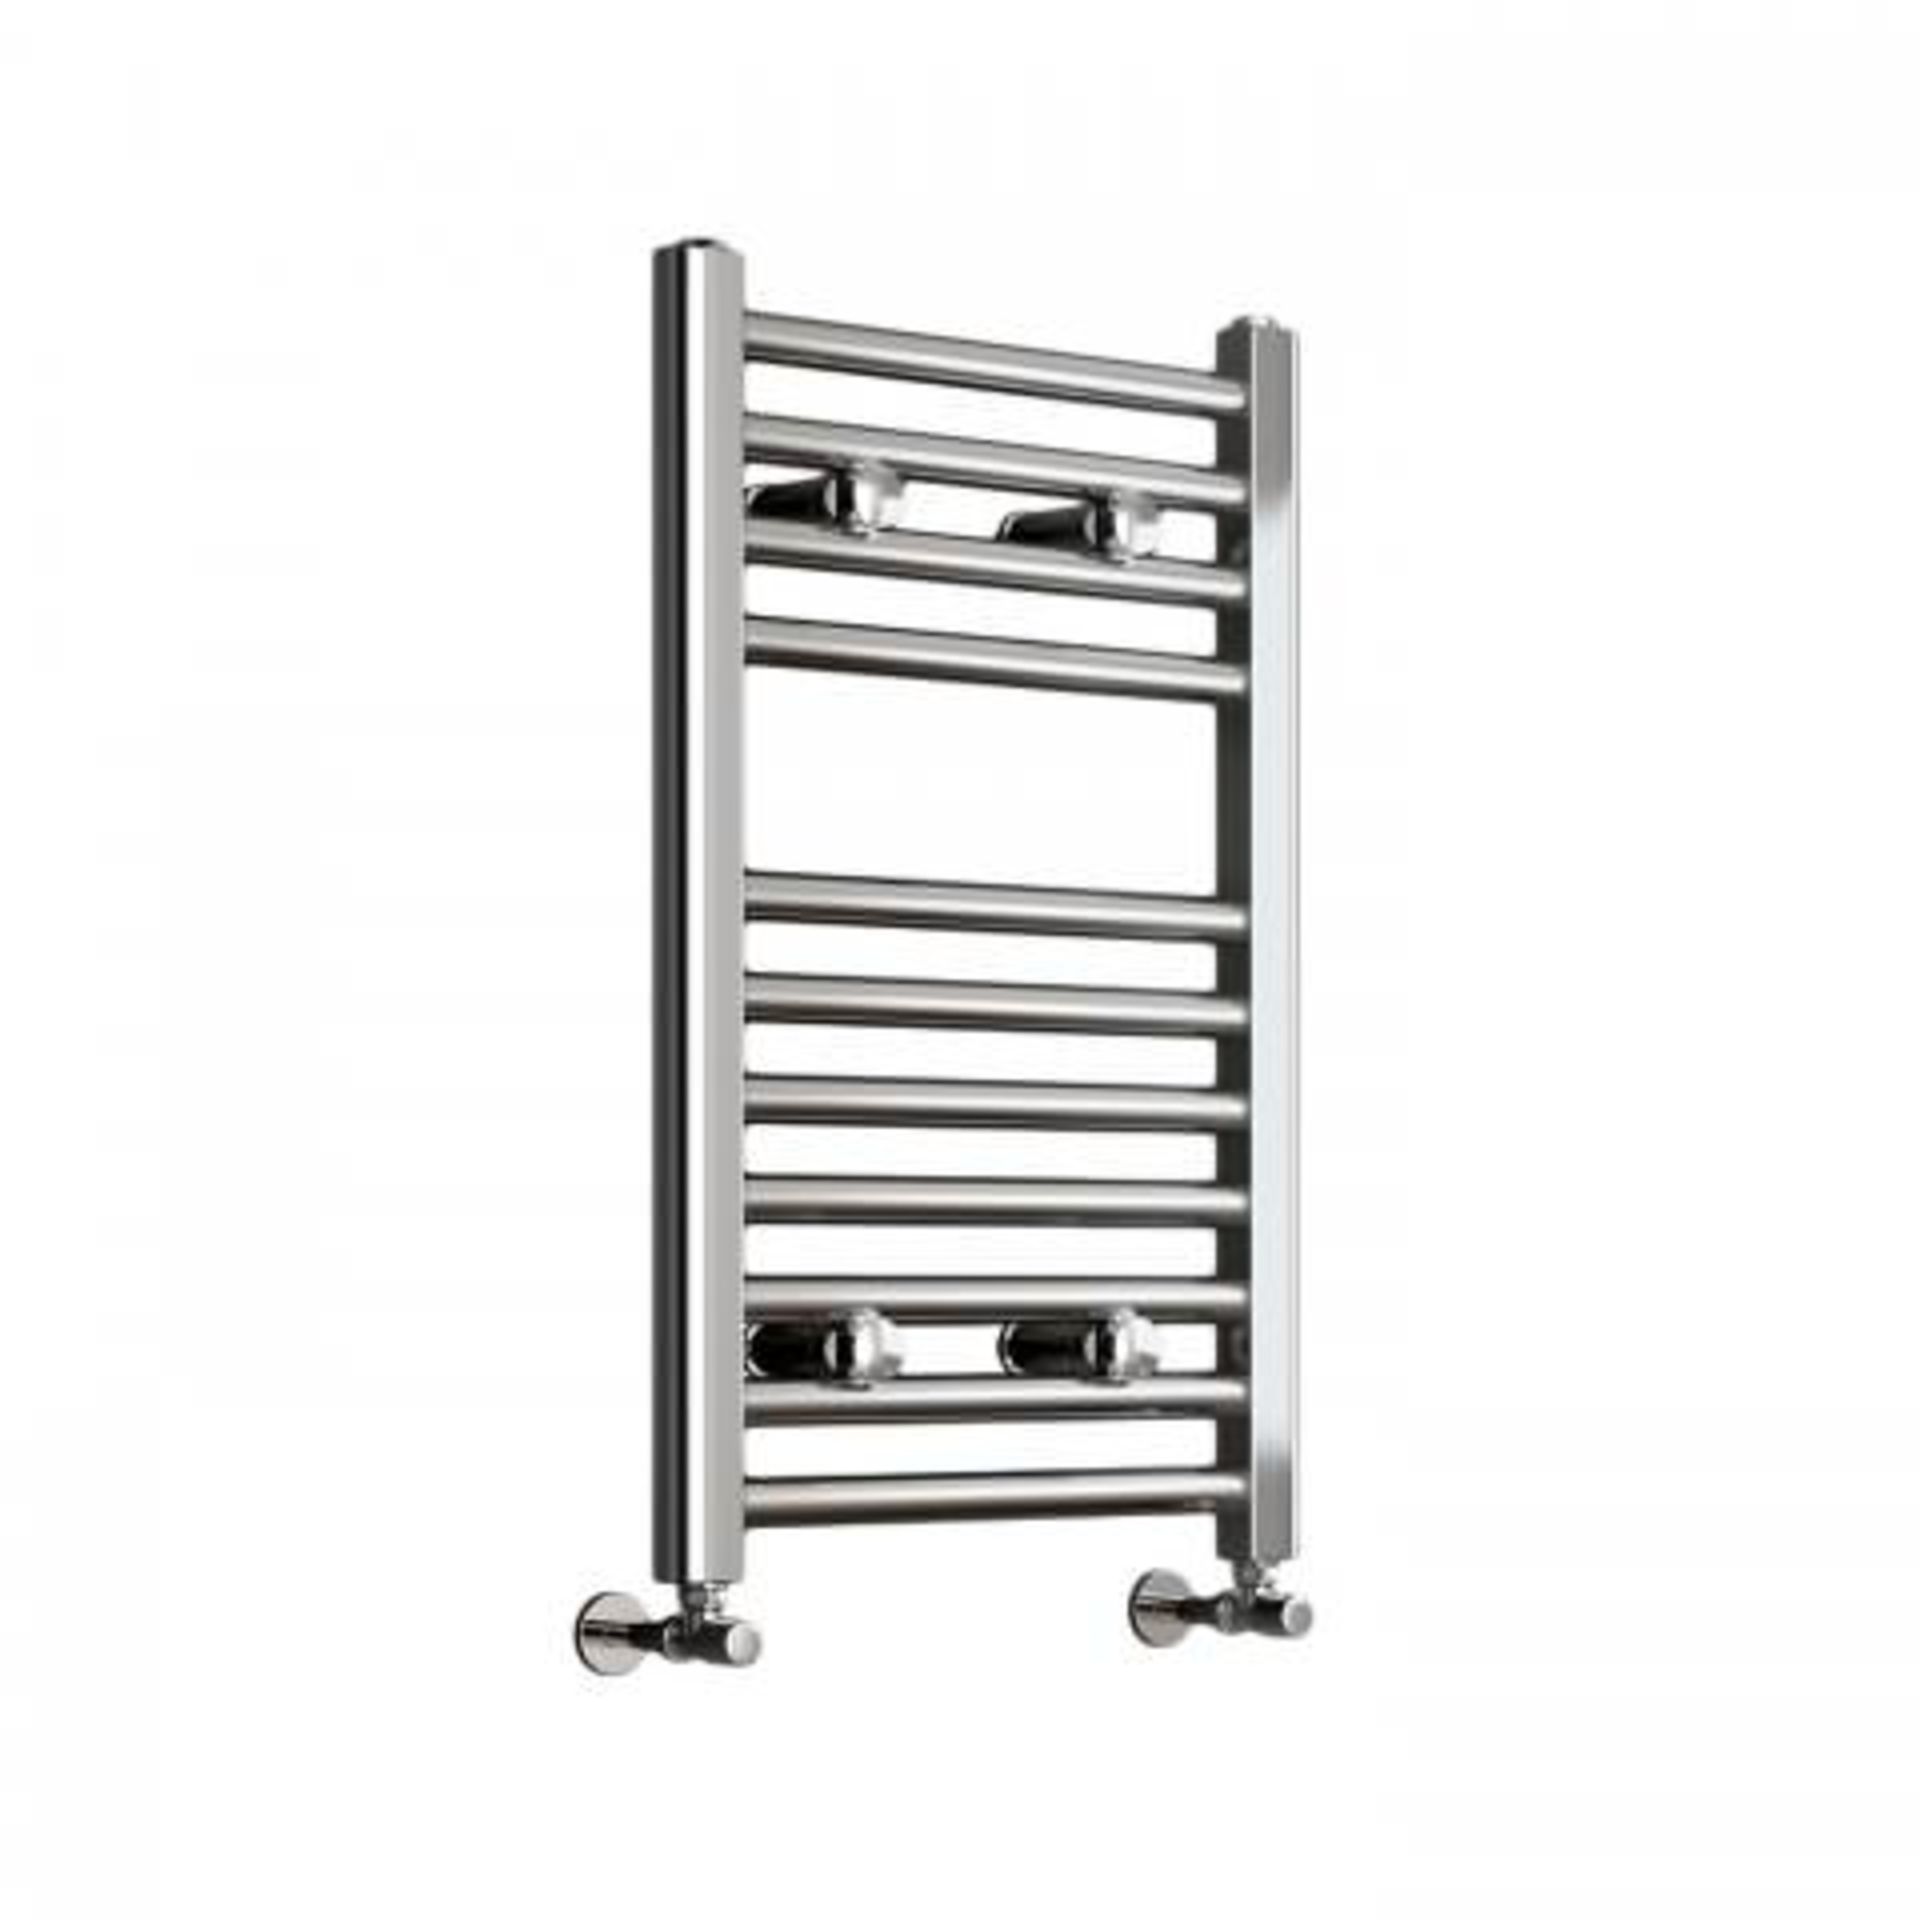 (Z217) 650x400mm - 25mm Tubes - Chrome Heated Straight Rail Ladder Towel Radiator Benefit from the